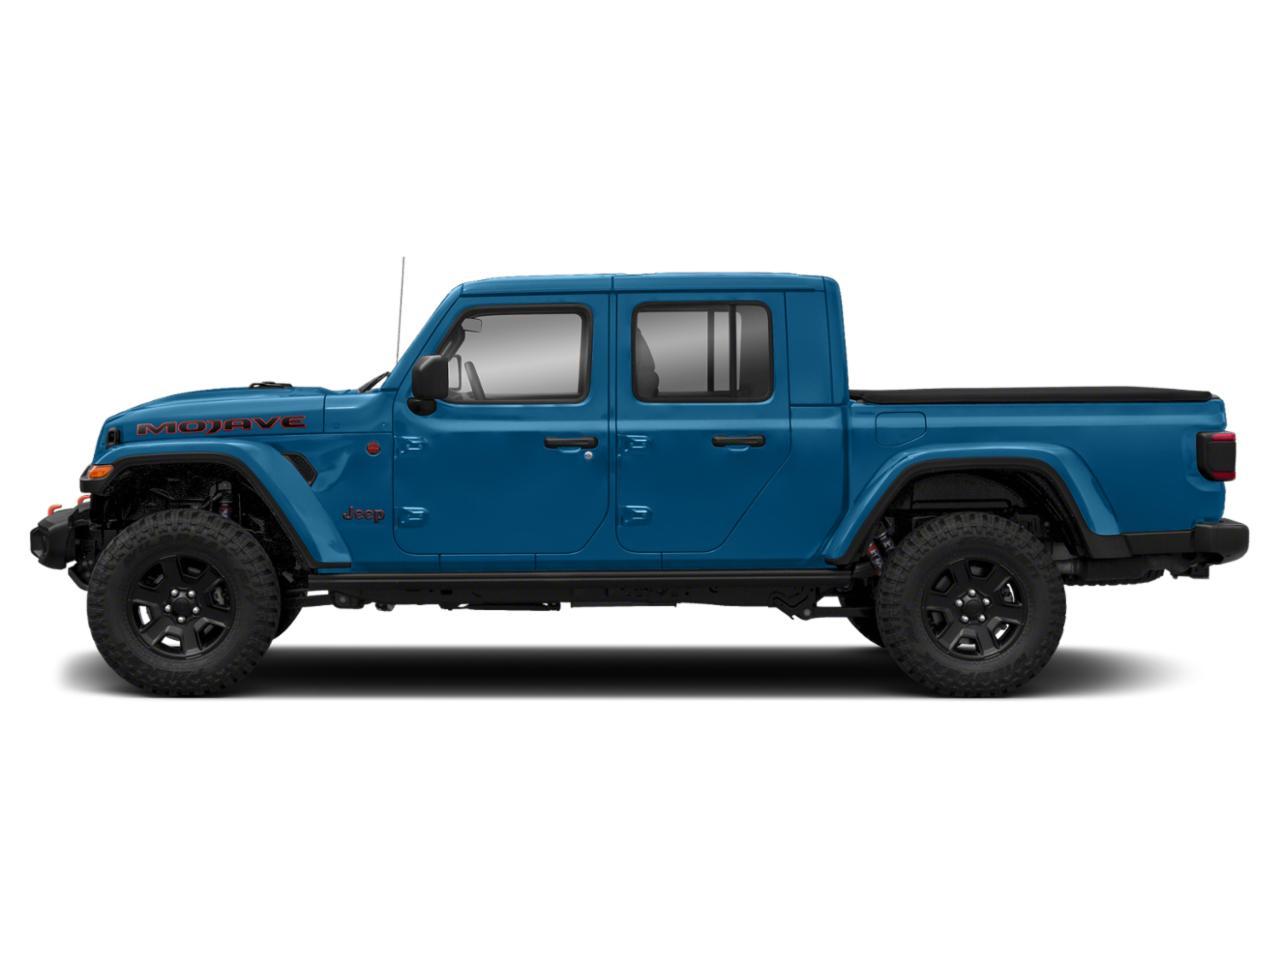 Hydro Blue Pearlcoat 21 Jeep Gladiator Mojave 4x4 For Sale At Criswell Auto 1c6jjteg6ml